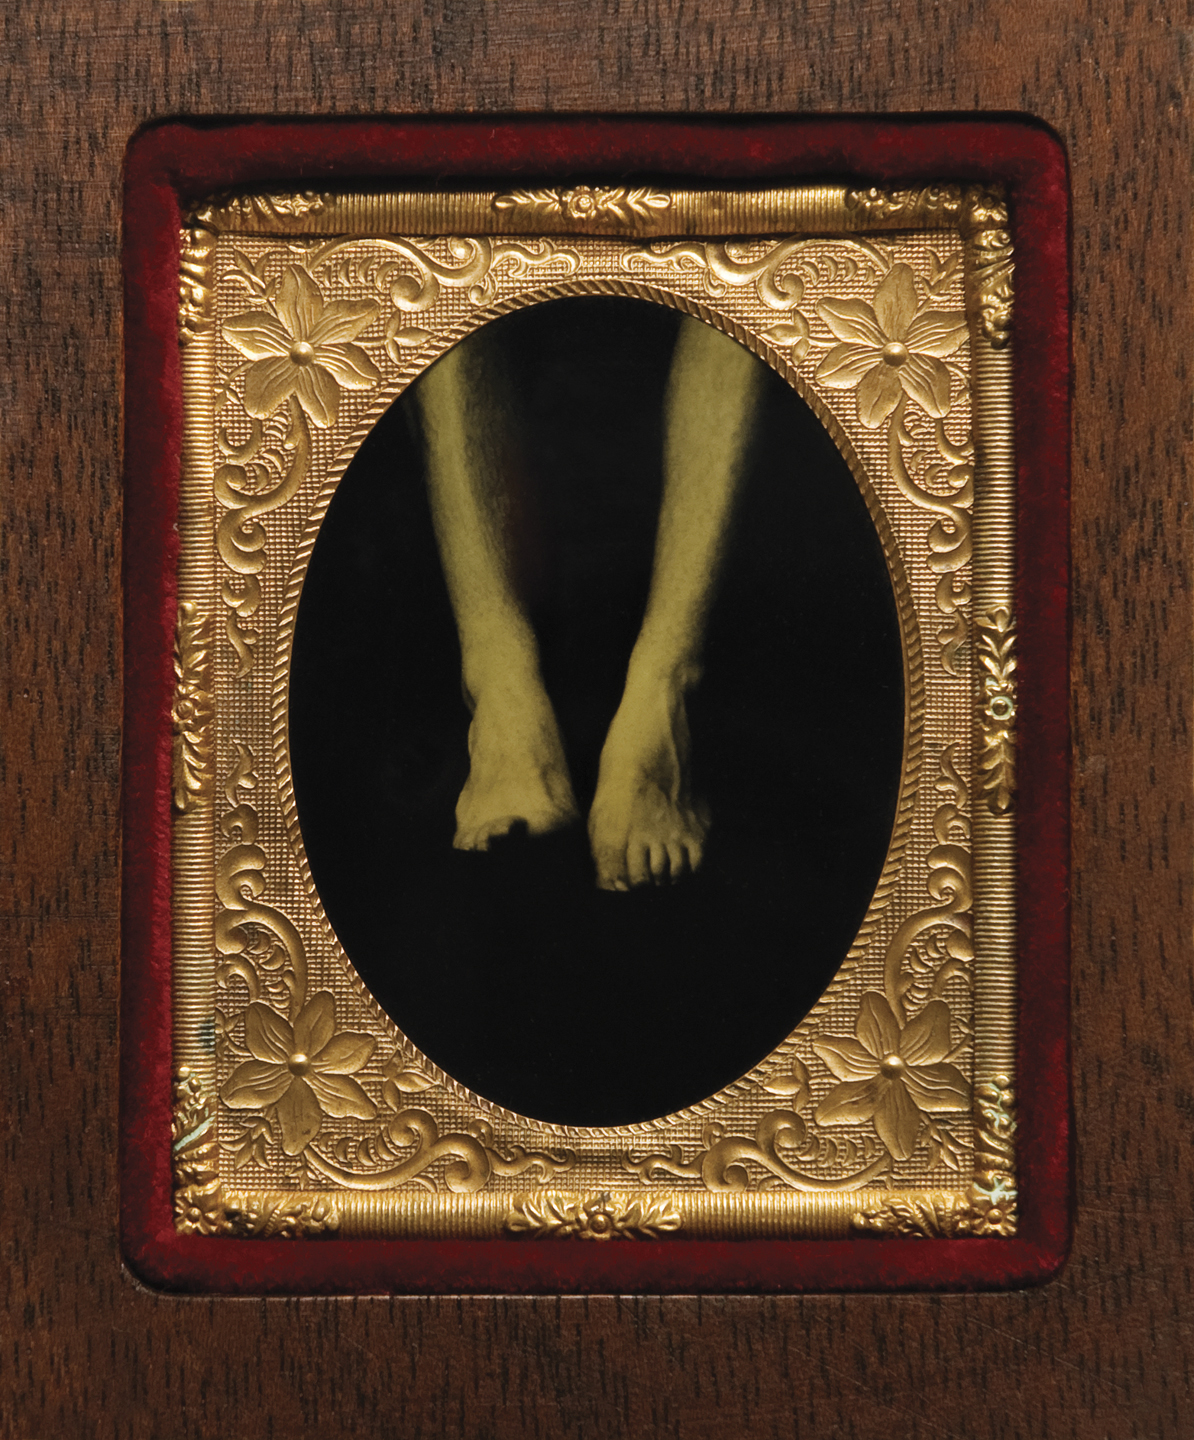   From “Self Portraits by Heterosexual Men” Ambrotype in 19th–century brass mat and preservers with velvet trim and custom-made mahogany frame, 3 1/8" x 2 3/4", 1996–98  